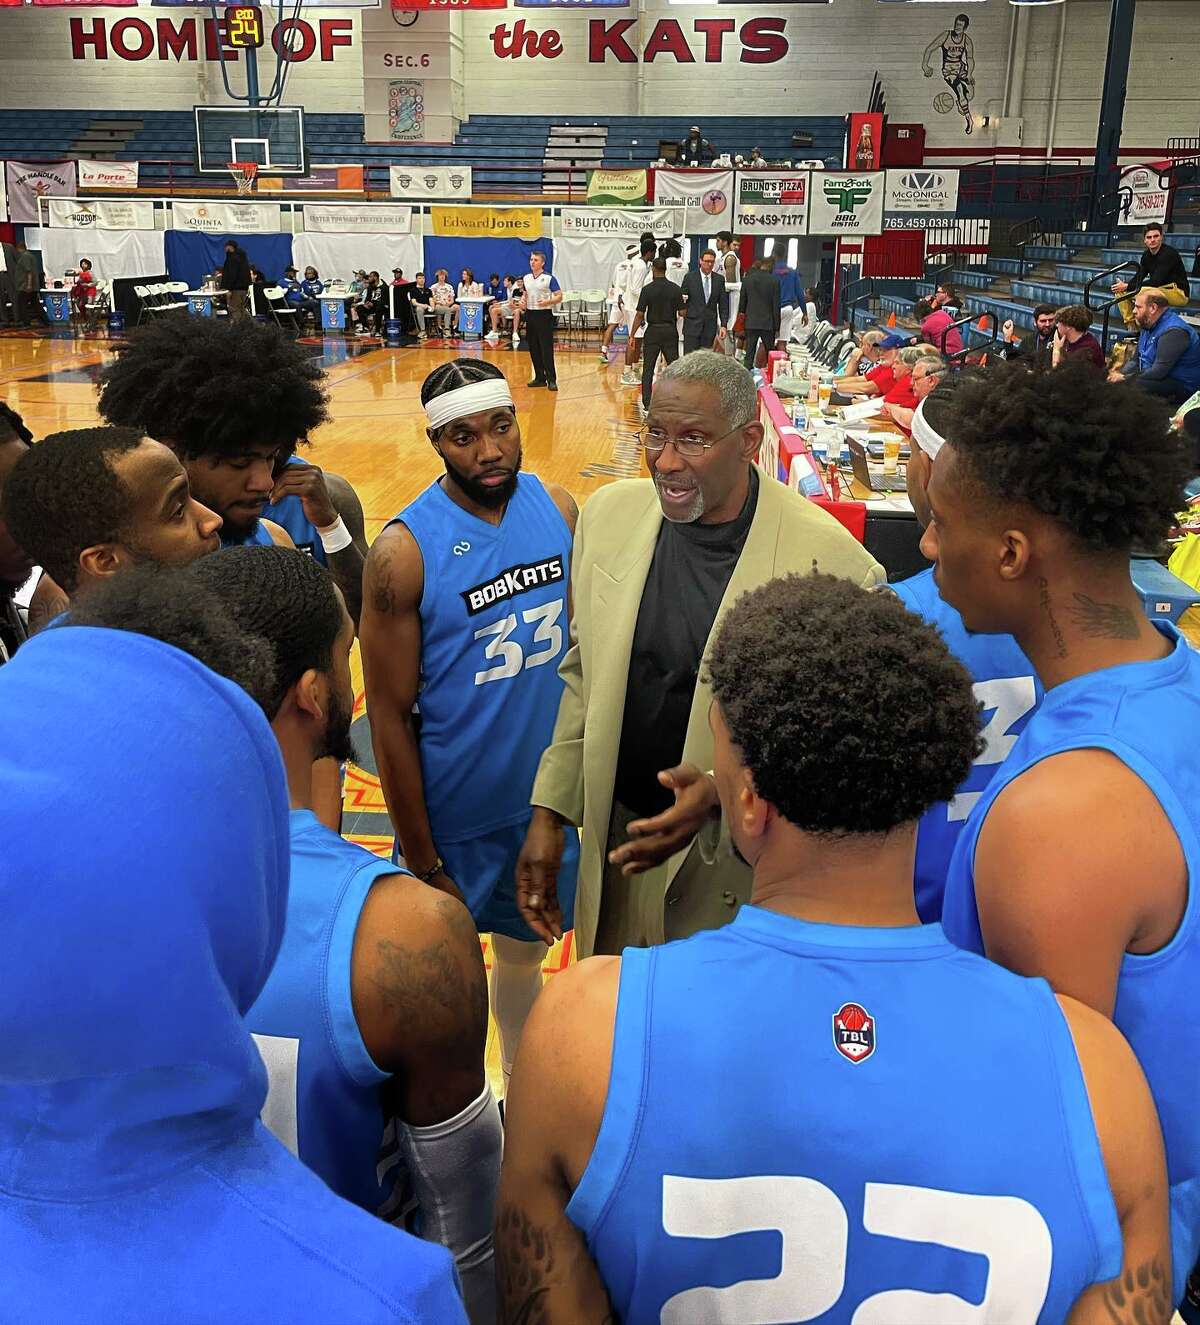 Kokomo BobKats head coach Cliff Levingston, who won two NBA titles with the Chicago Bulls, said he tells his players, "It's always greater later."